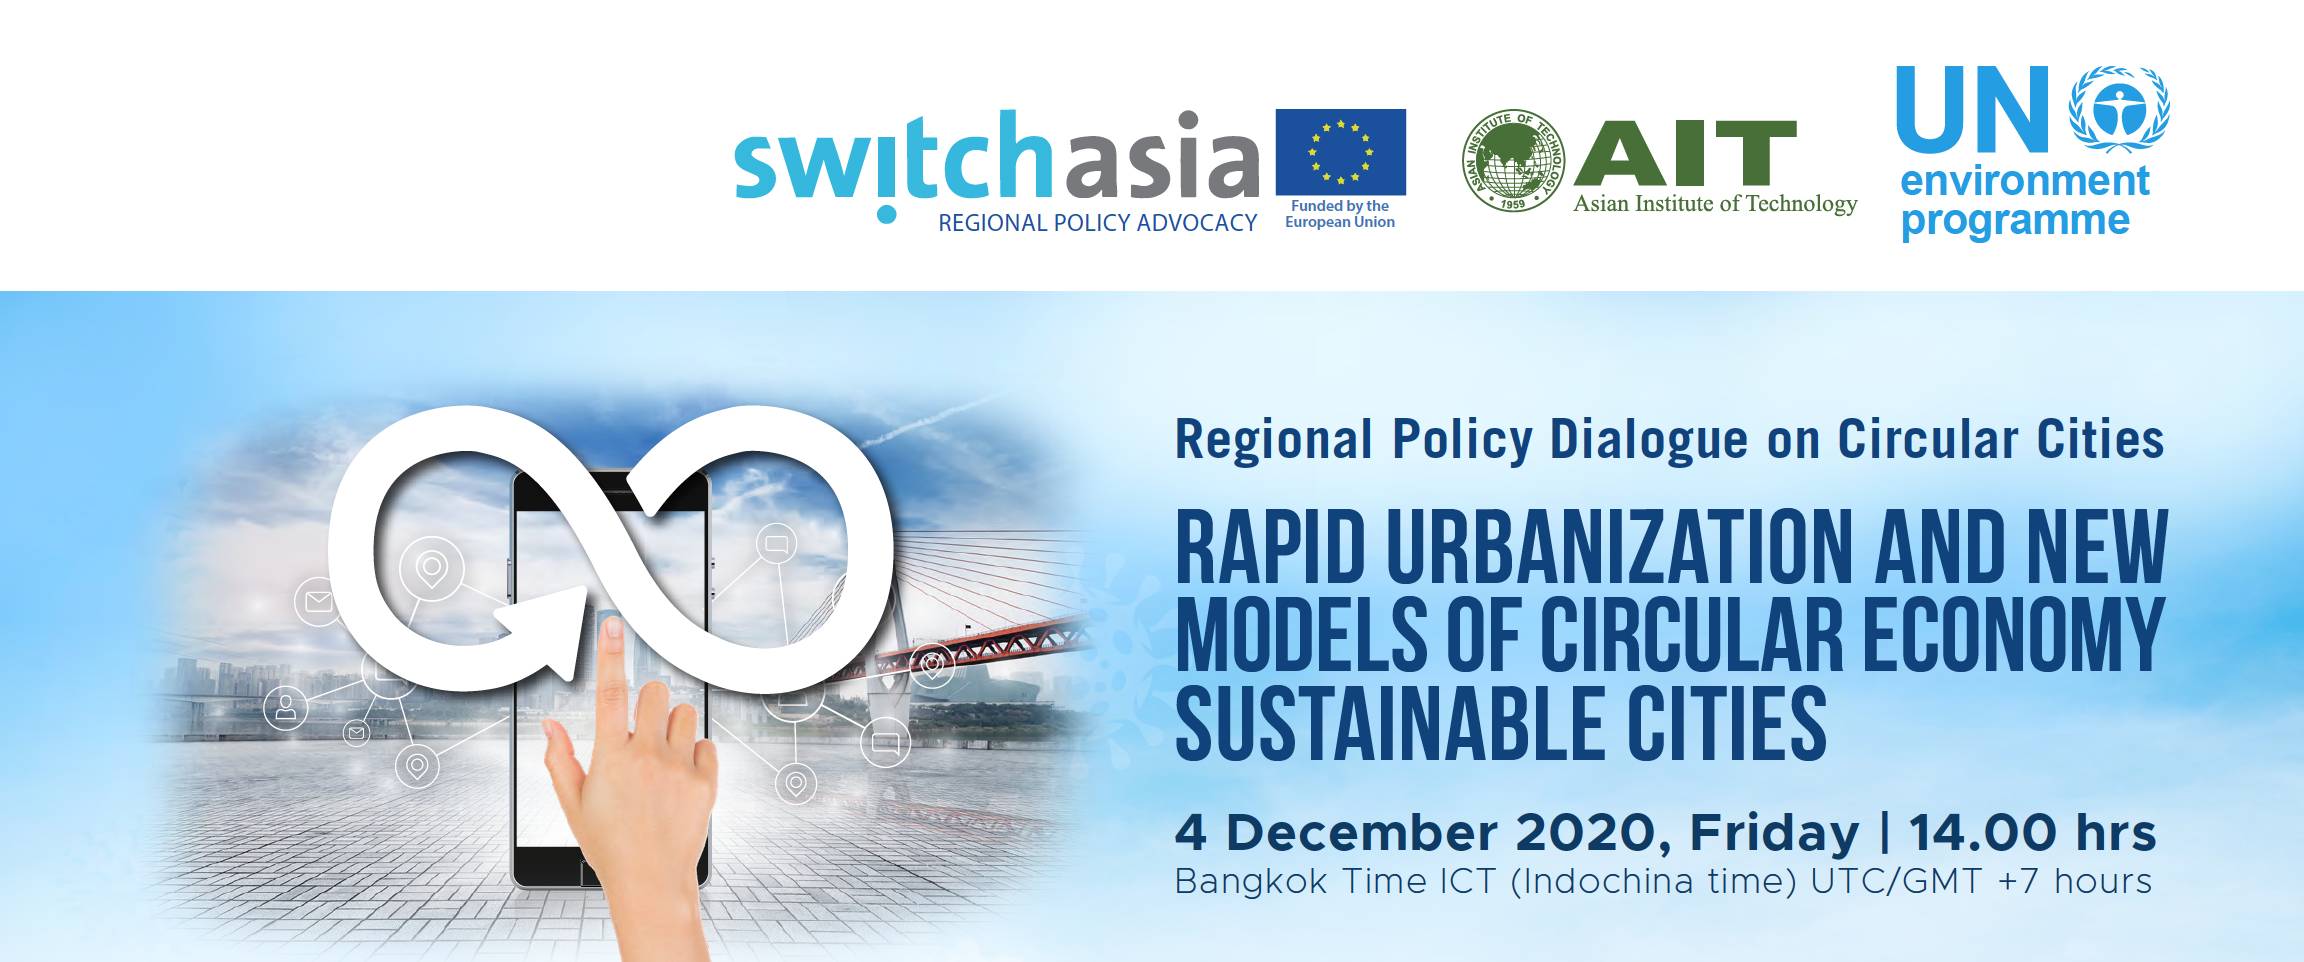 Regional Policy Dialogue on Circular Cities